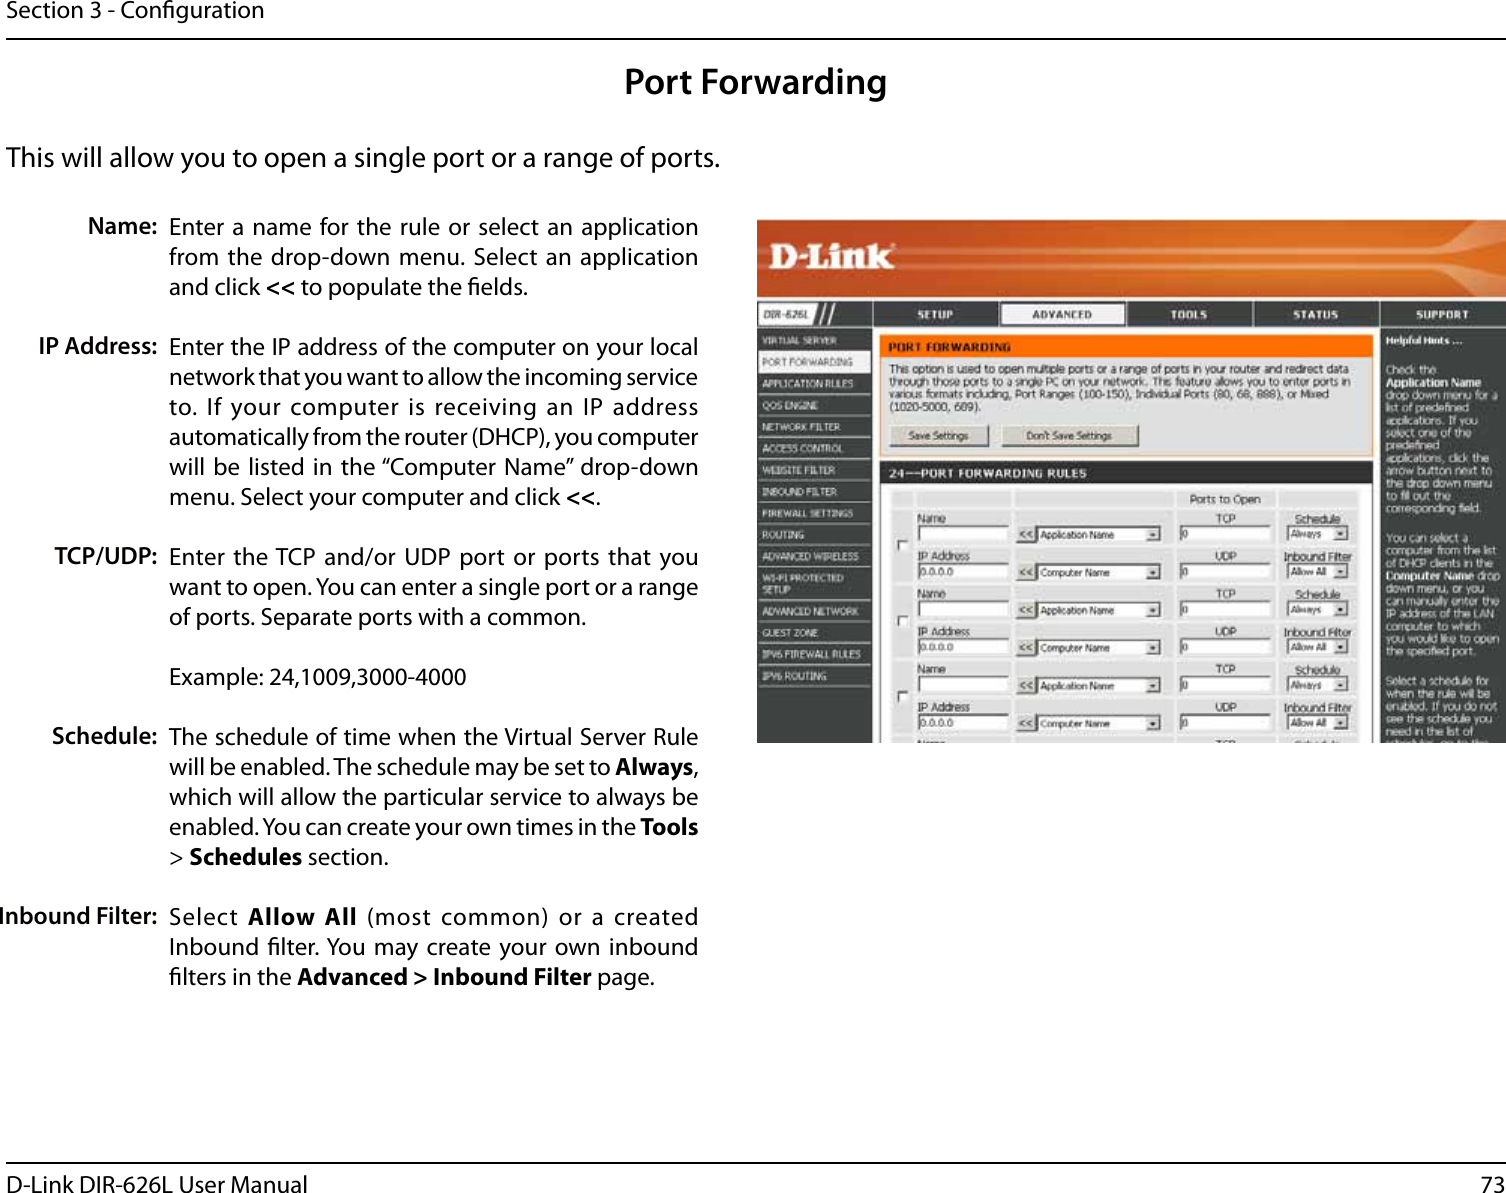 73D-Link DIR-626L User ManualSection 3 - CongurationThis will allow you to open a single port or a range of ports.Port ForwardingEnter a name  for the rule or select an application from the drop-down menu. Select an  application and click &lt;&lt; to populate the elds.Enter the IP address of the computer on your local network that you want to allow the incoming service to. If your computer is receiving an IP address automatically from the router (DHCP), you computer will be  listed in the “Computer Name” drop-down menu. Select your computer and click &lt;&lt;. Enter the TCP and/or UDP port or ports that you want to open. You can enter a single port or a range of ports. Separate ports with a common.Example: 24,1009,3000-4000The schedule of time when the Virtual Server Rule will be enabled. The schedule may be set to Always, which will allow the particular service to always be enabled. You can create your own times in the Tools &gt; Schedules section.Select  Allow  All  (most common) or a created Inbound lter. You may create your own inbound lters in the Advanced &gt; Inbound Filter page.Name:IP Address:TCP/UDP:Schedule:Inbound Filter: